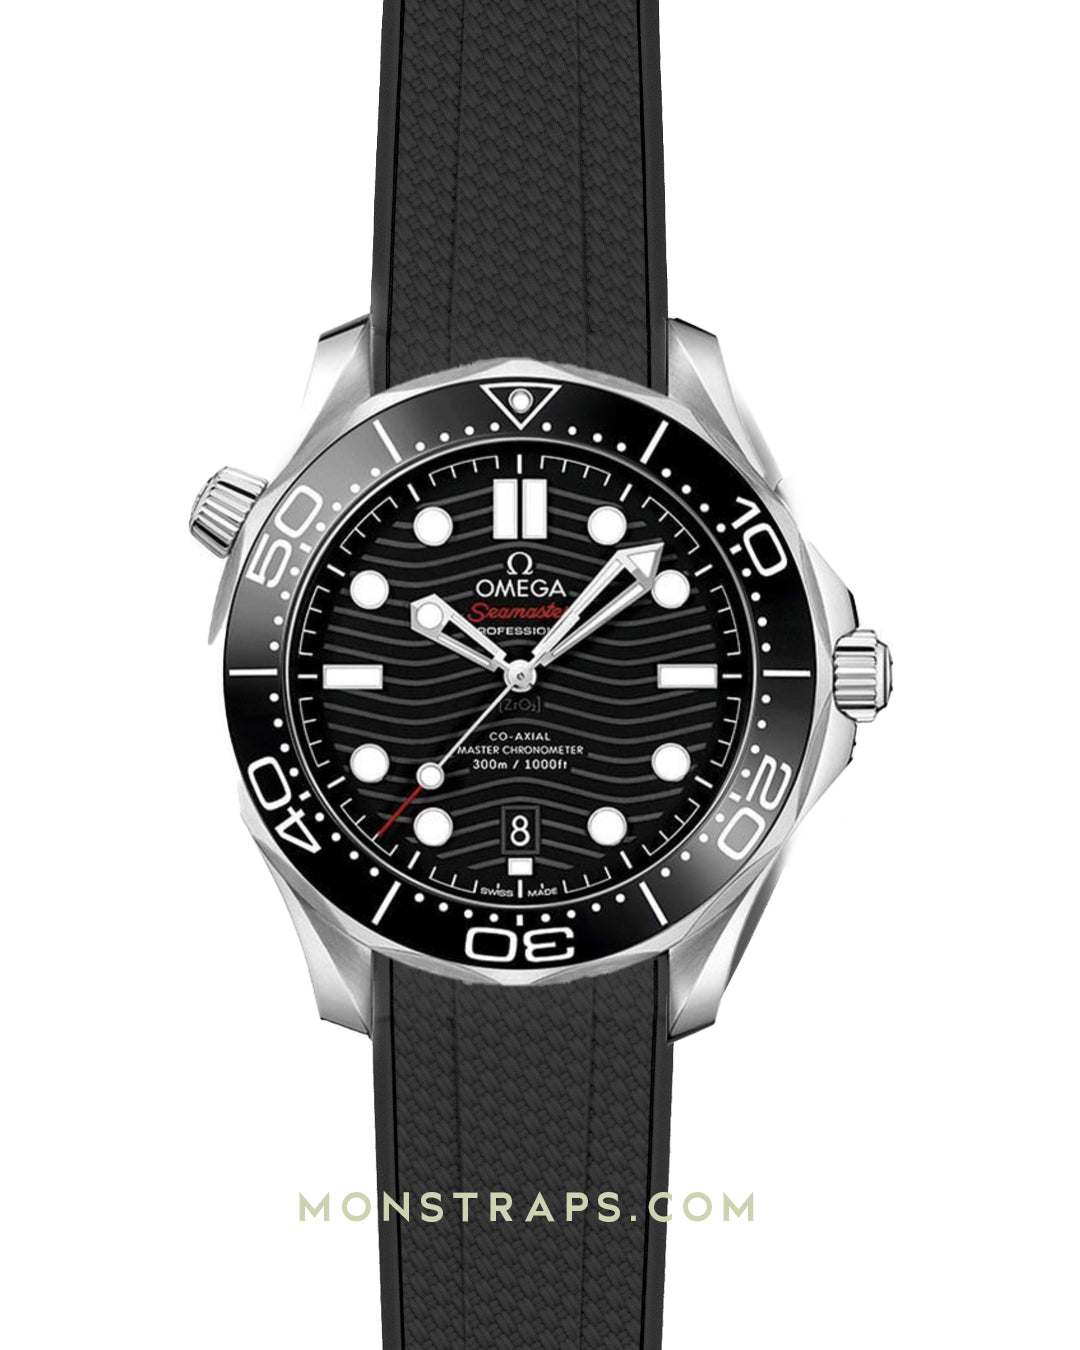 TEXTURED RUBBER - CURVED FITTED STRAP FOR OMEGA SEAMASTER